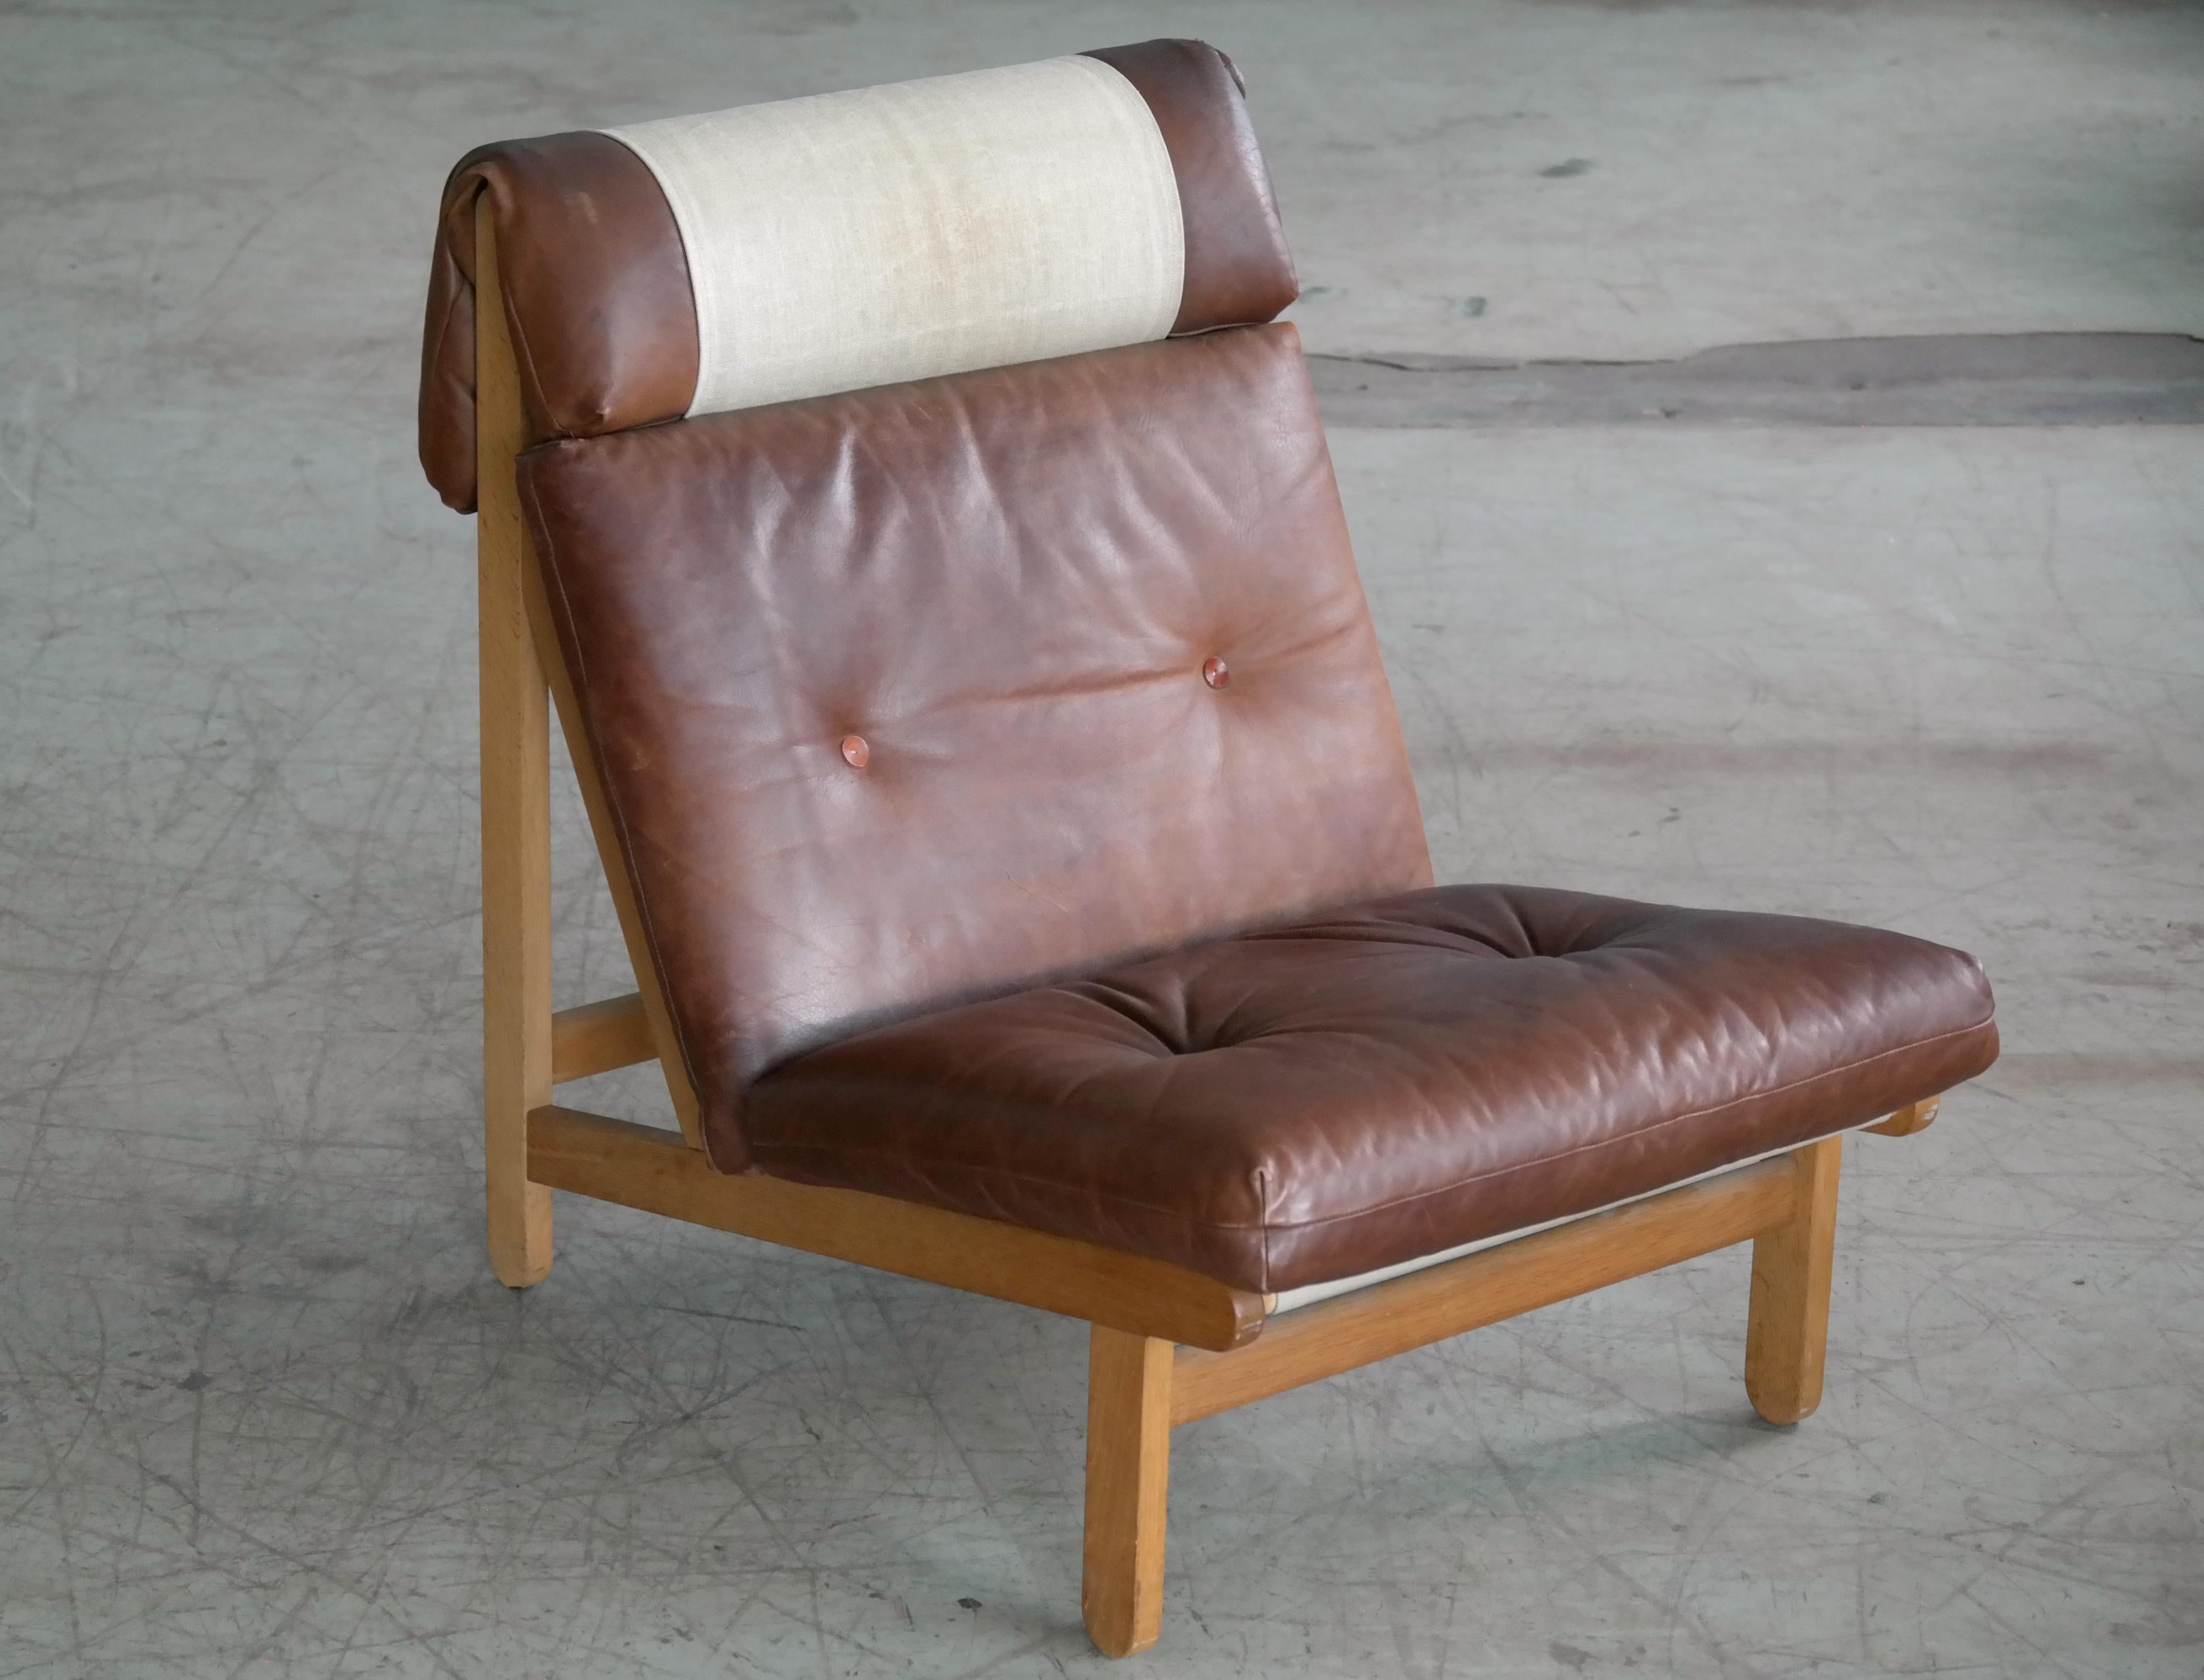 Rare and very sought after easy lounge chair designed by Bernt Petersen for Schiang Furniture of Denmark in 1966. Oak frame with loose cushions in seat and back upholstered with brown leather fitted with buttons. Neckrest and seat stretched with